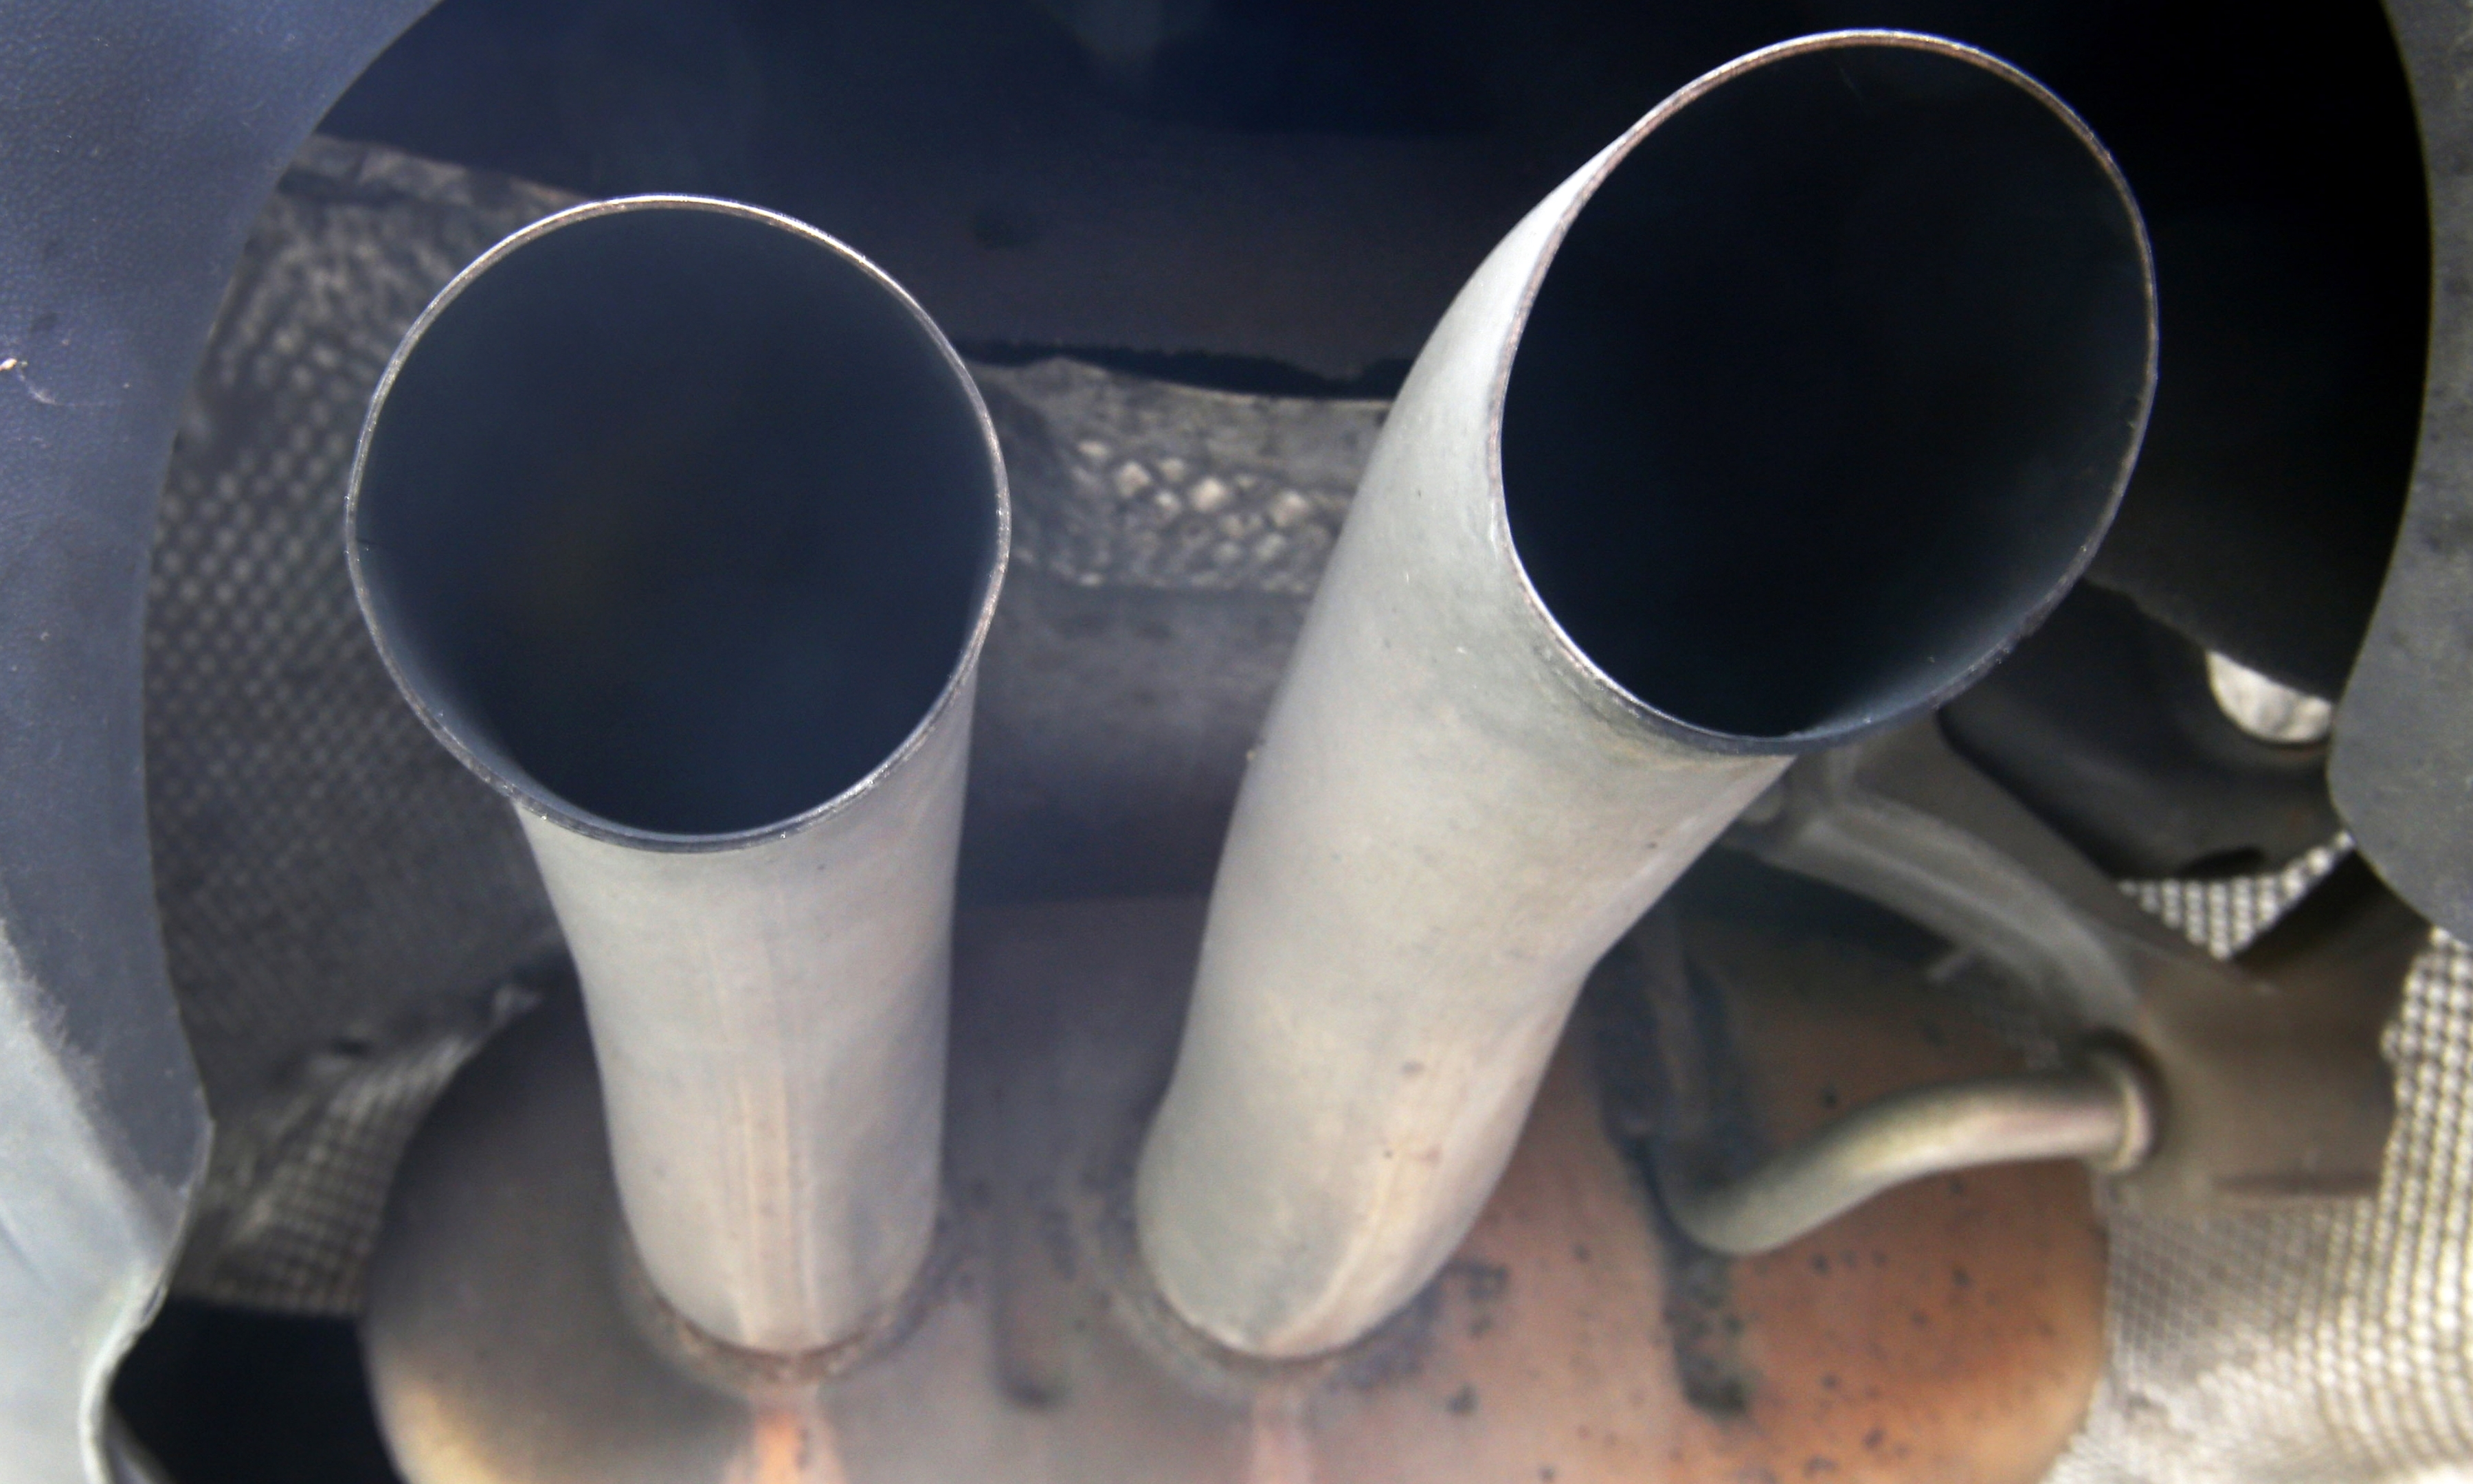 Loud exhausts on speeding cars are said to be keeping people awake at night.